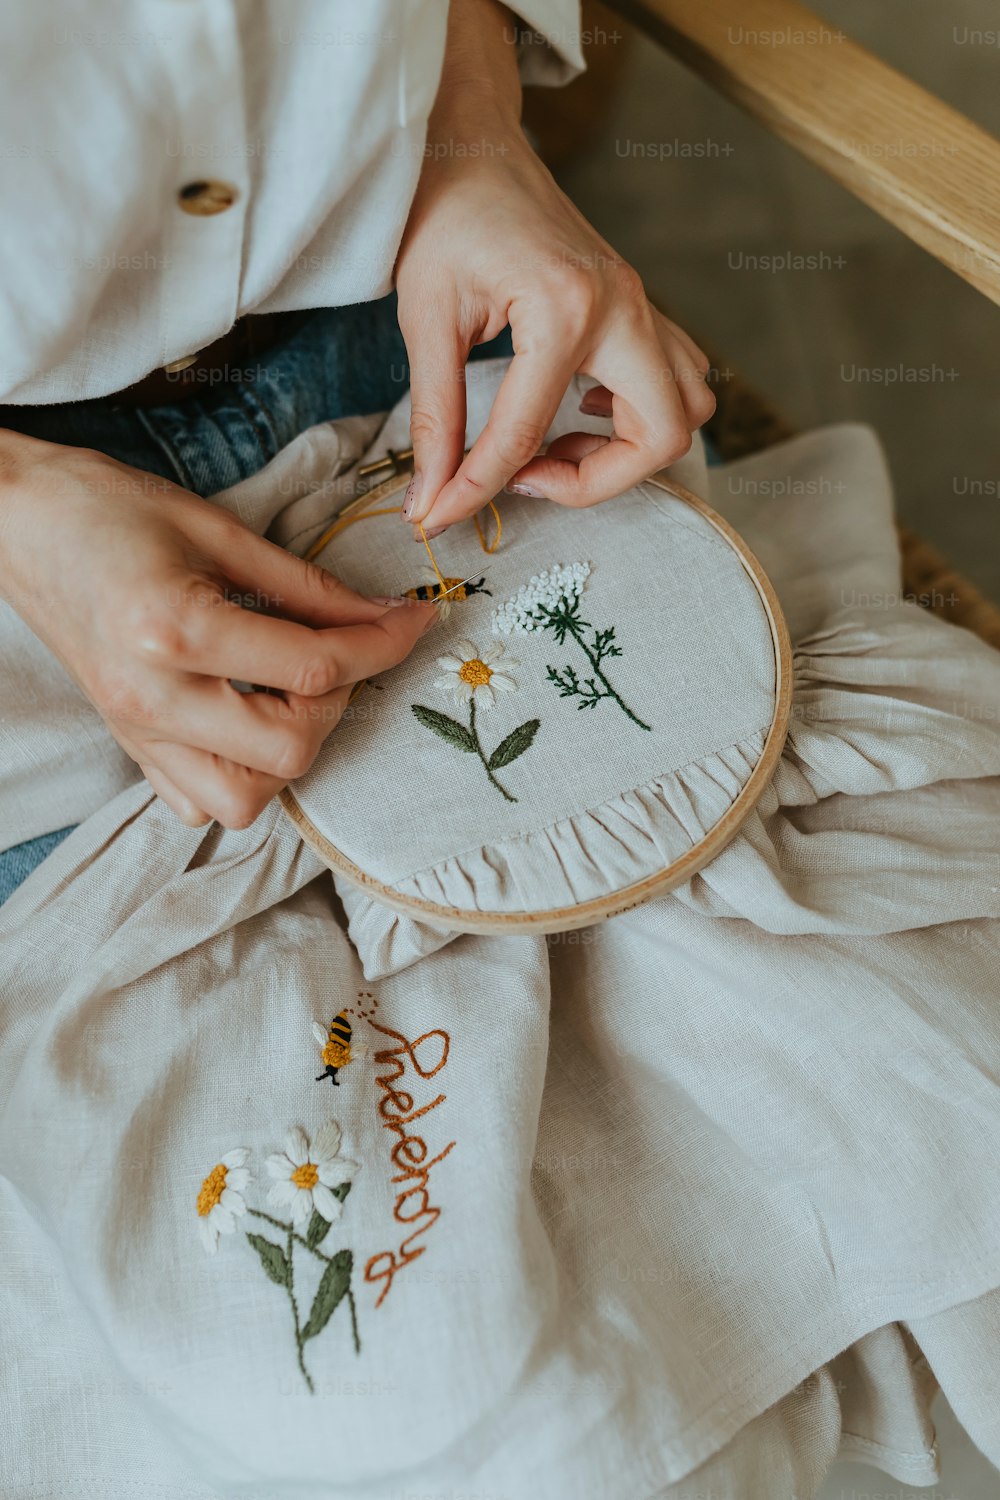 a woman is working on a embroidery project